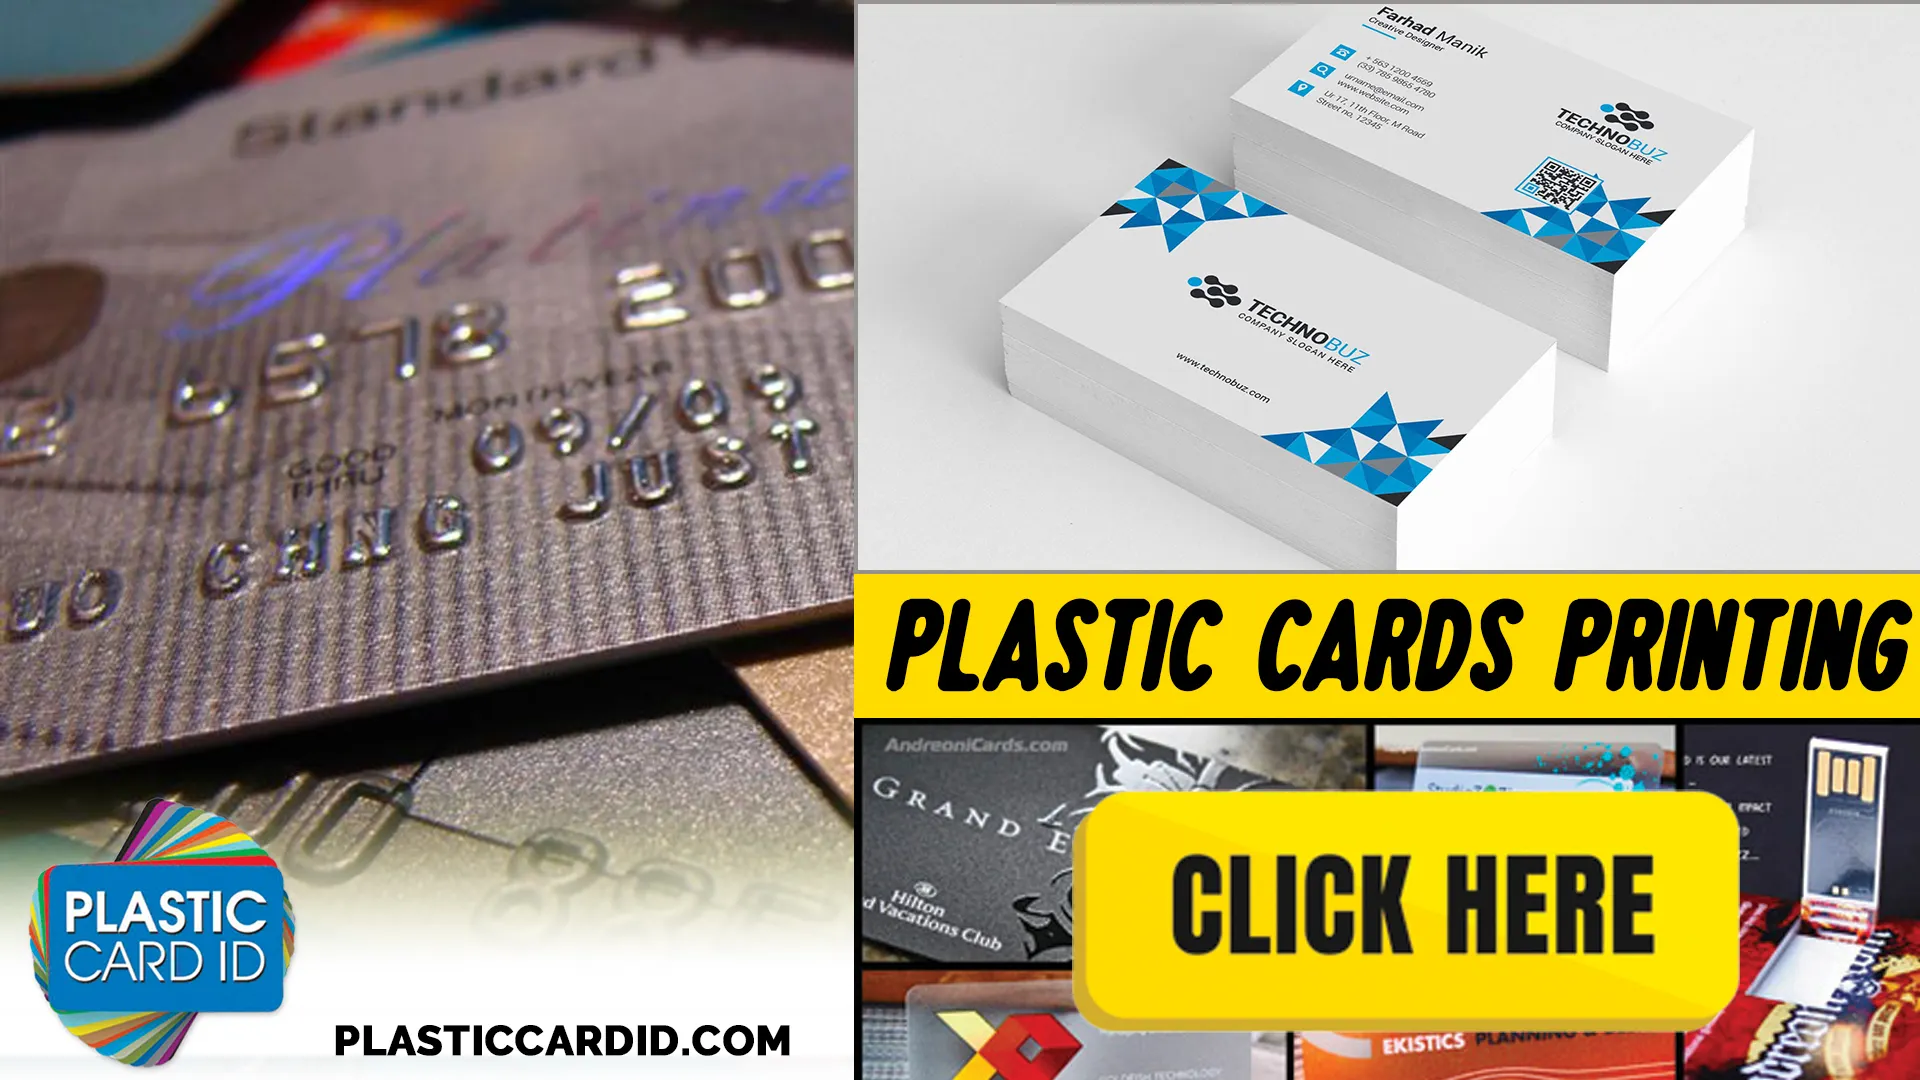 The Impact of PCID
's Eco-Friendly Card Printing